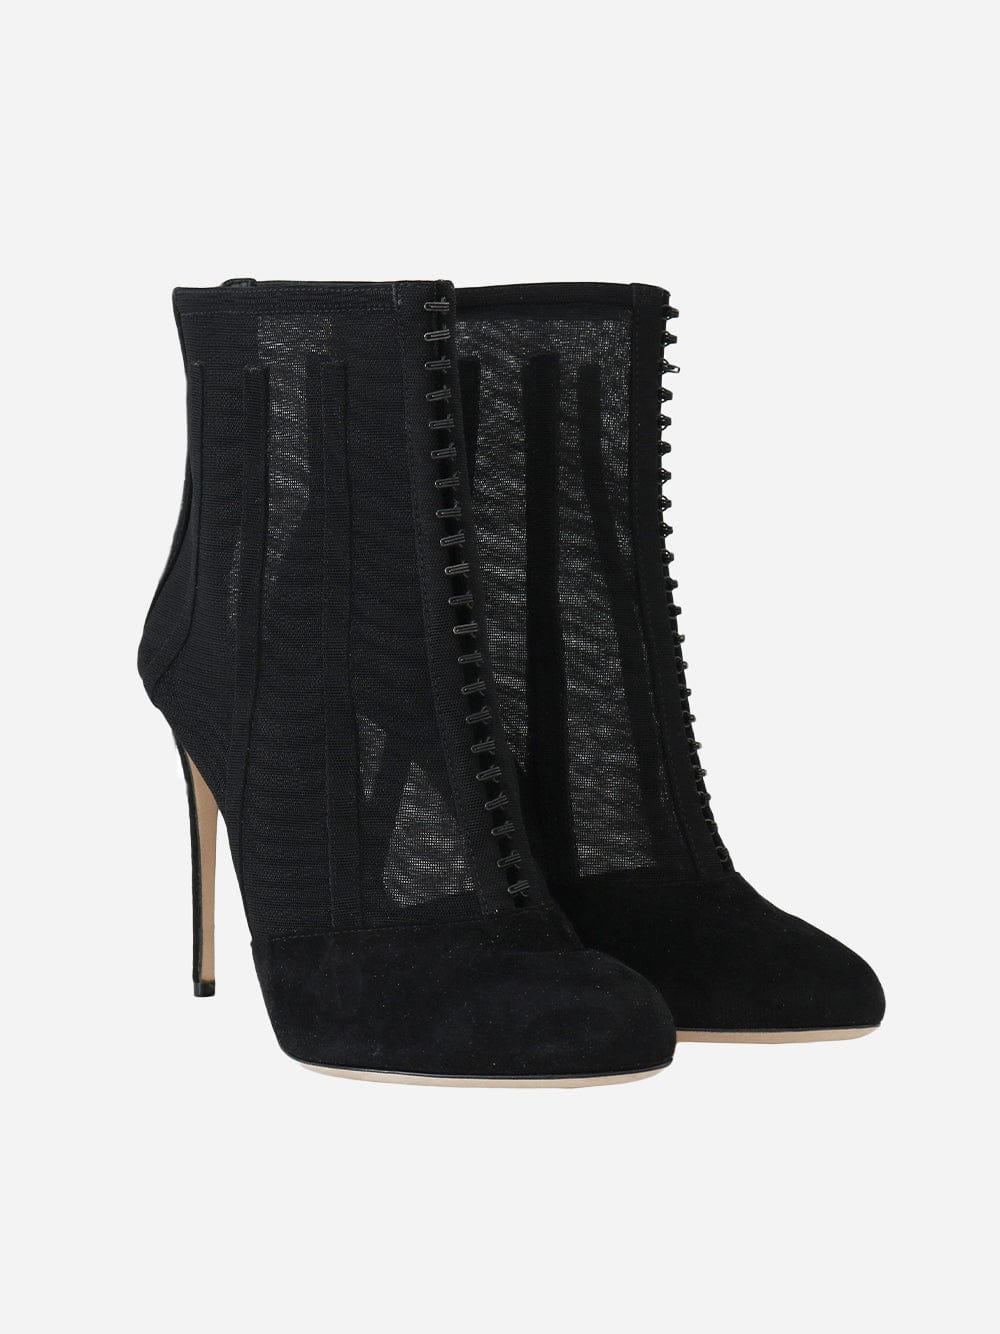 Dolce & Gabbana Mesh Tulle Ankle Boots